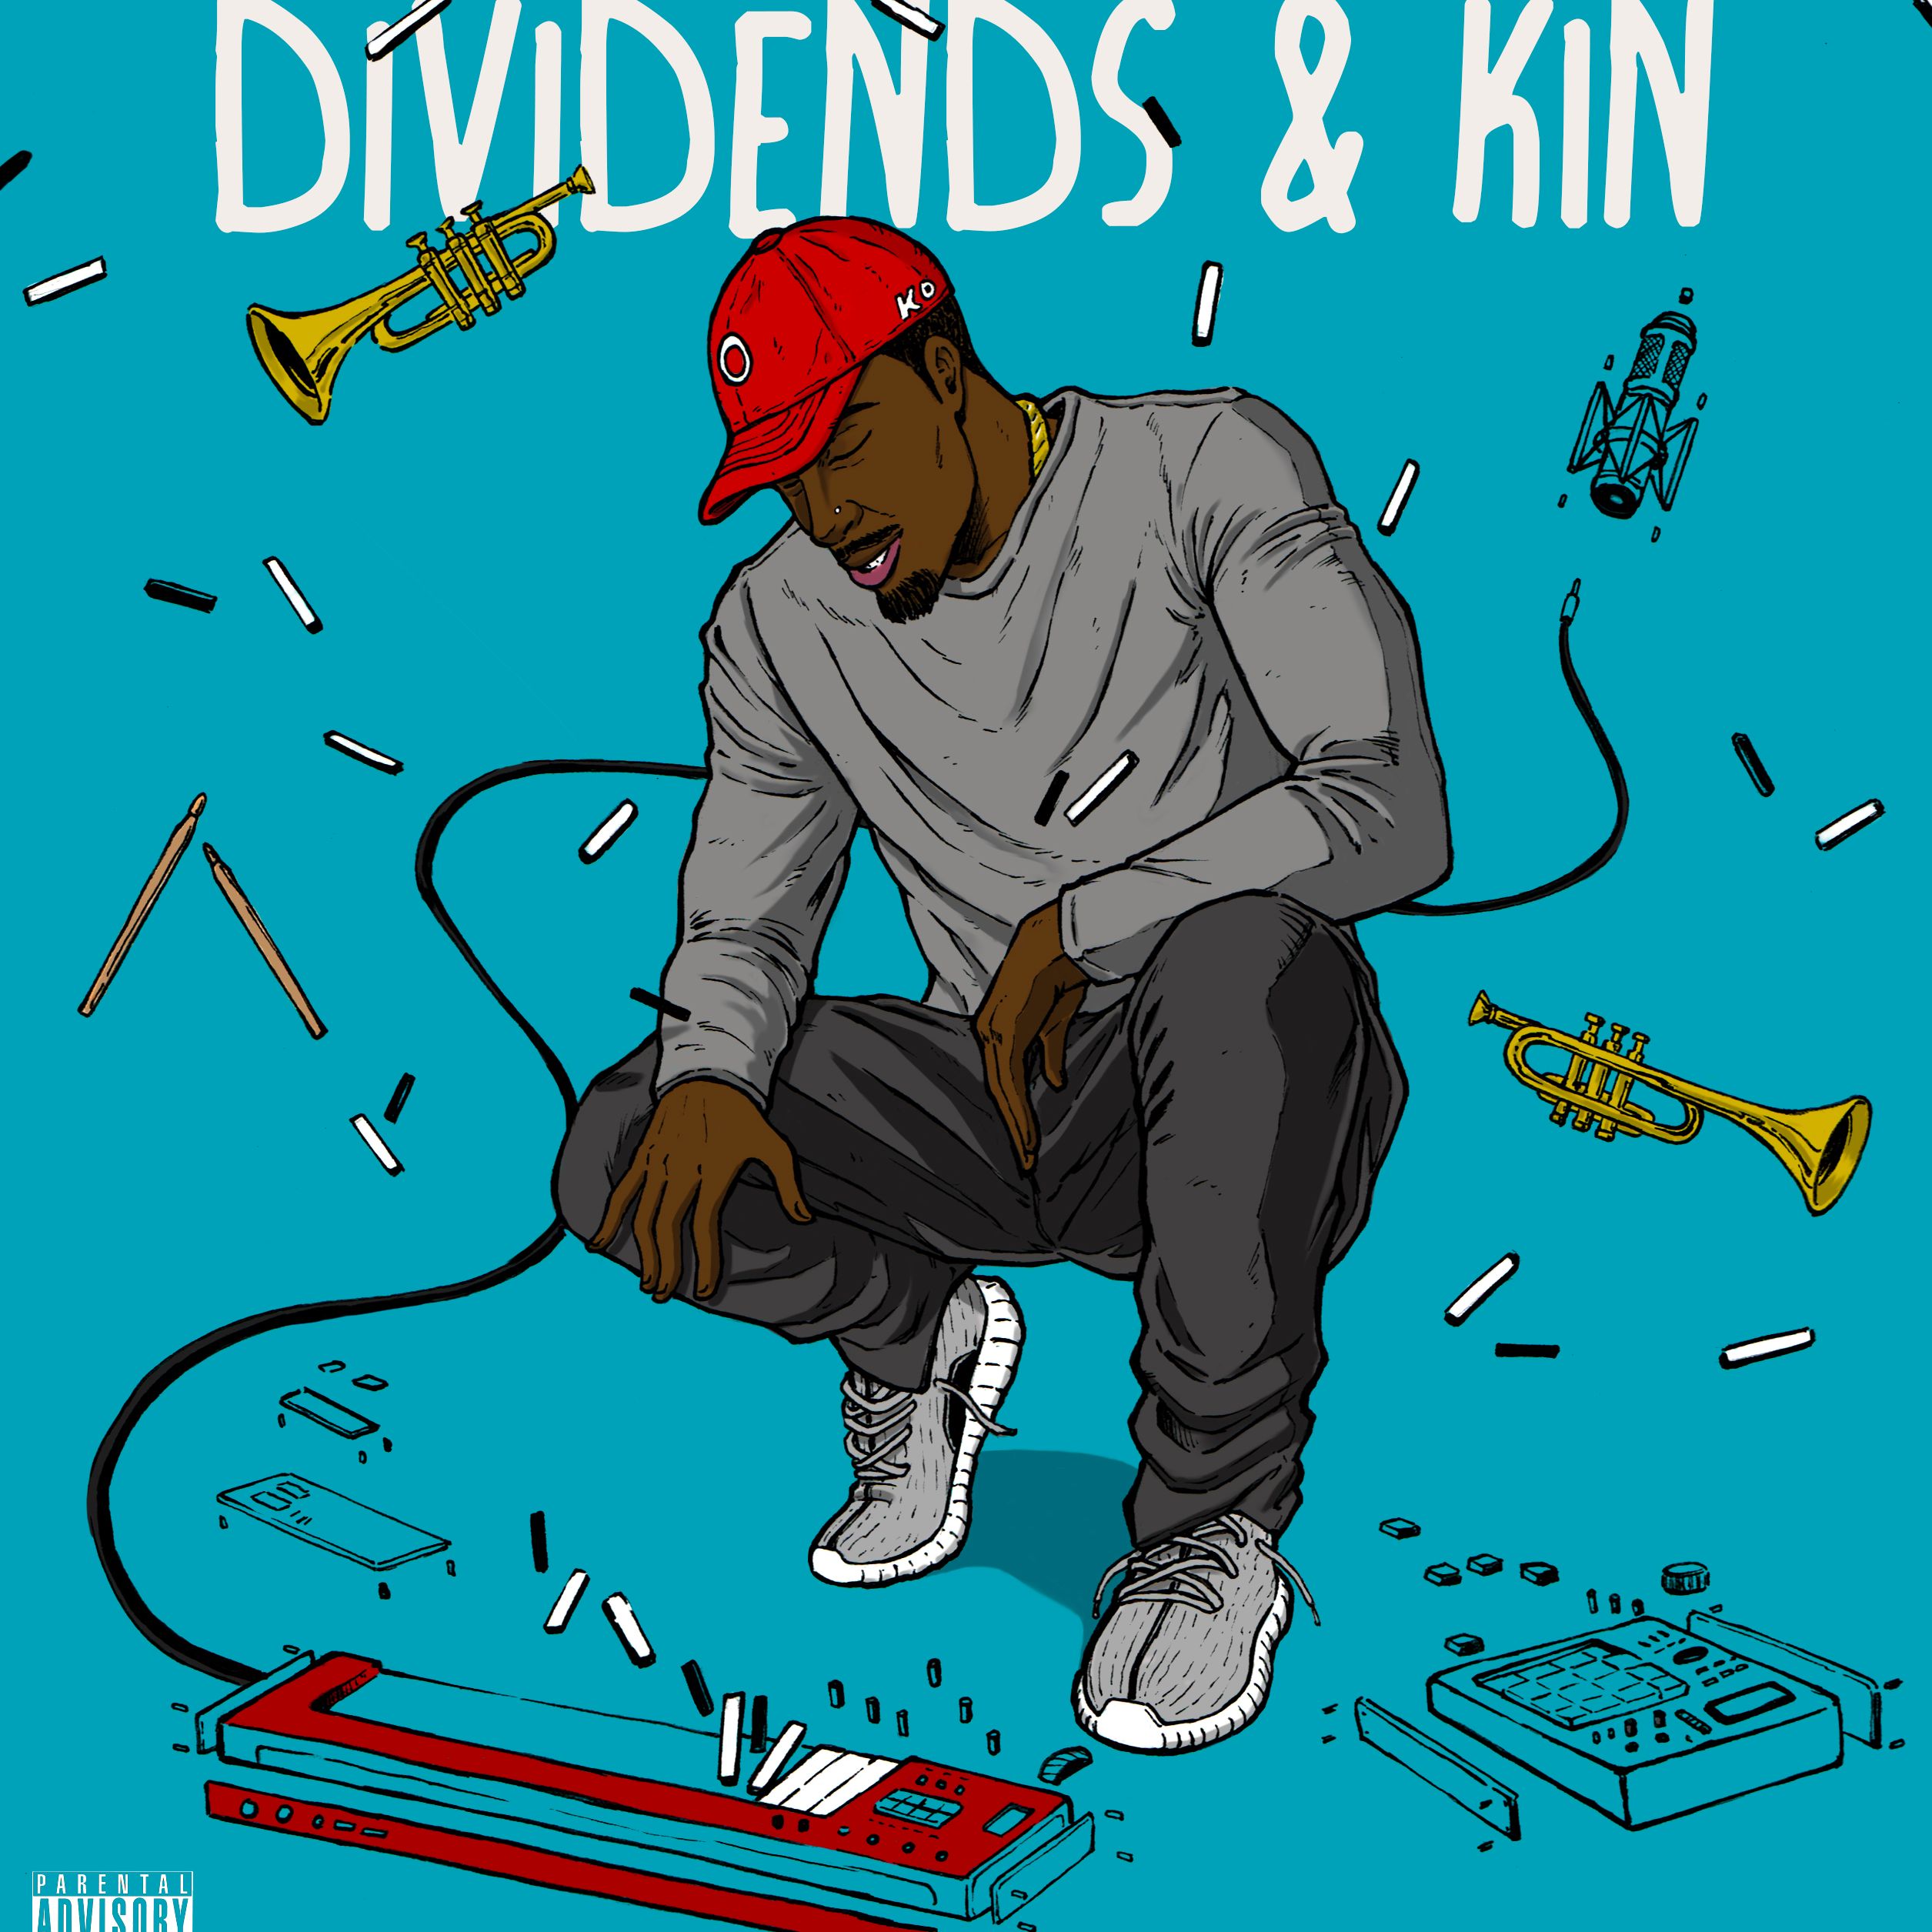 musicbyKO Wants Two Things Out Of Life “Dividends & Kin”